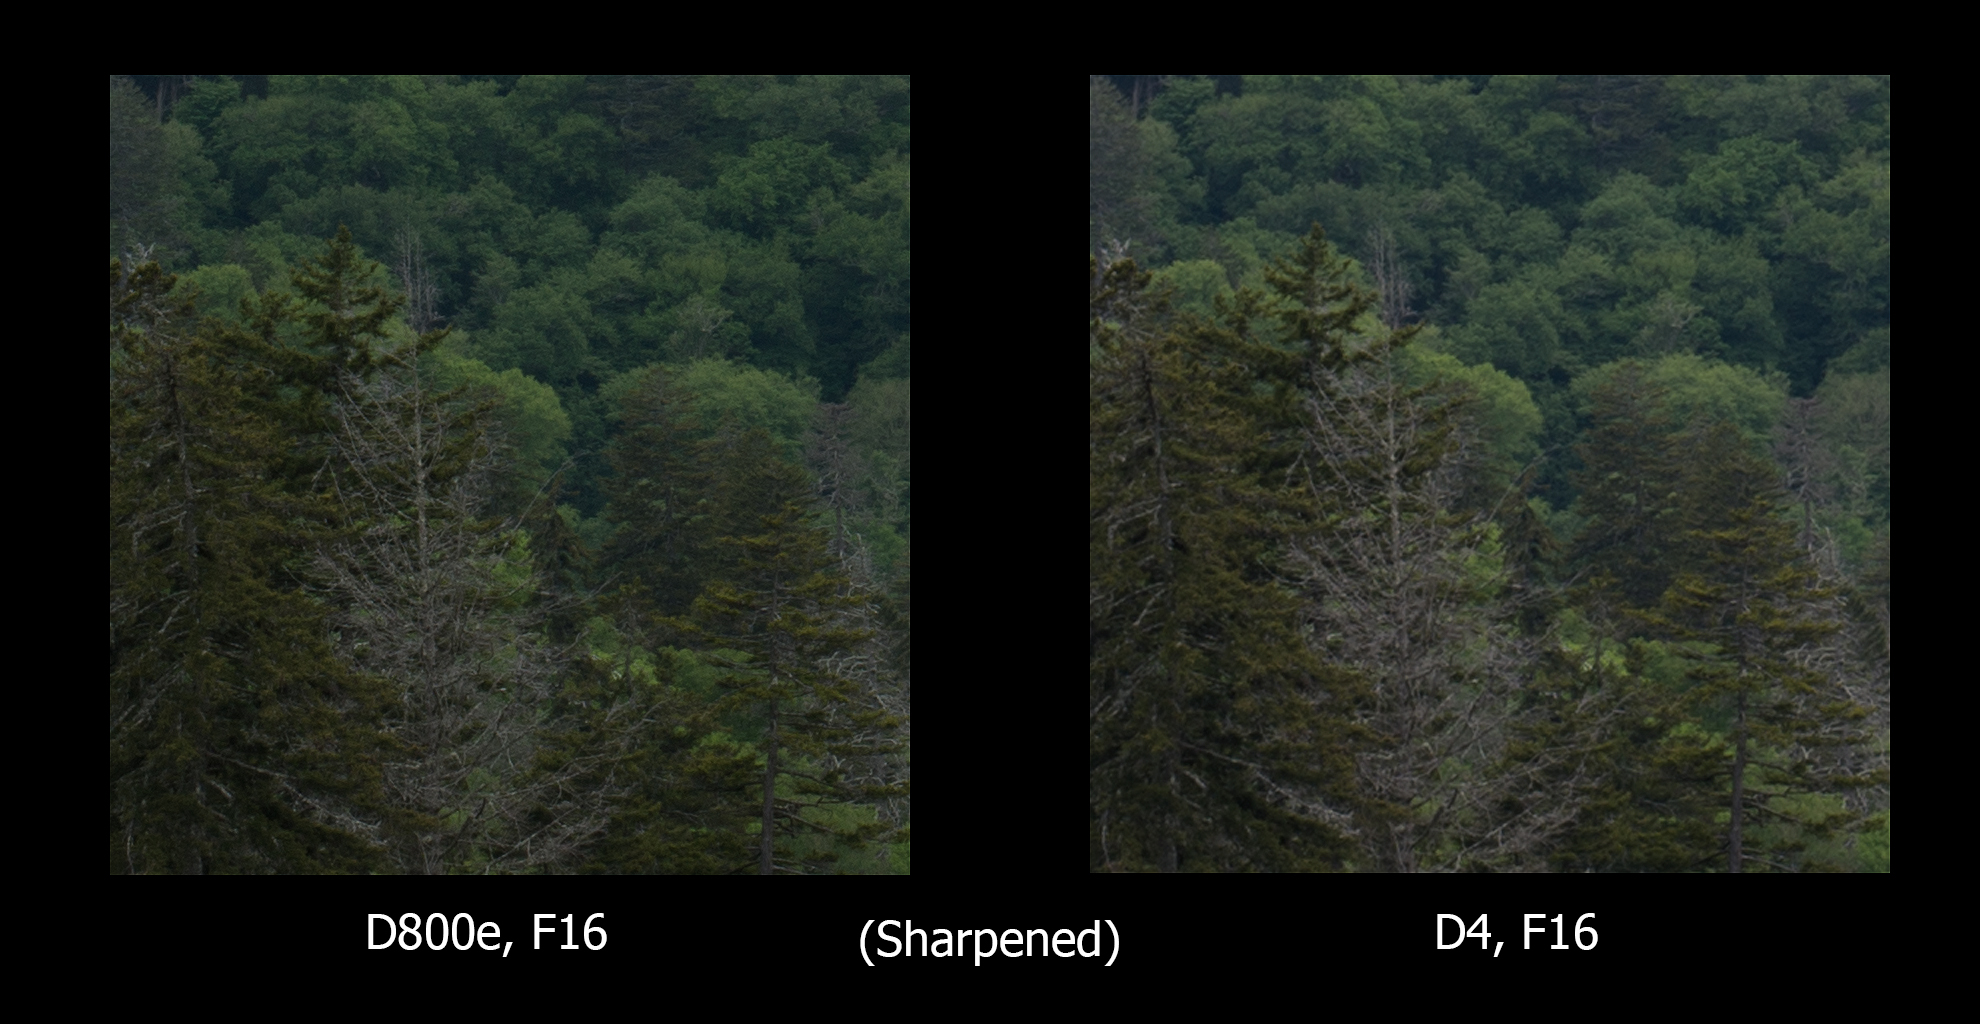 Same as above, only with equal sharpening added for both images